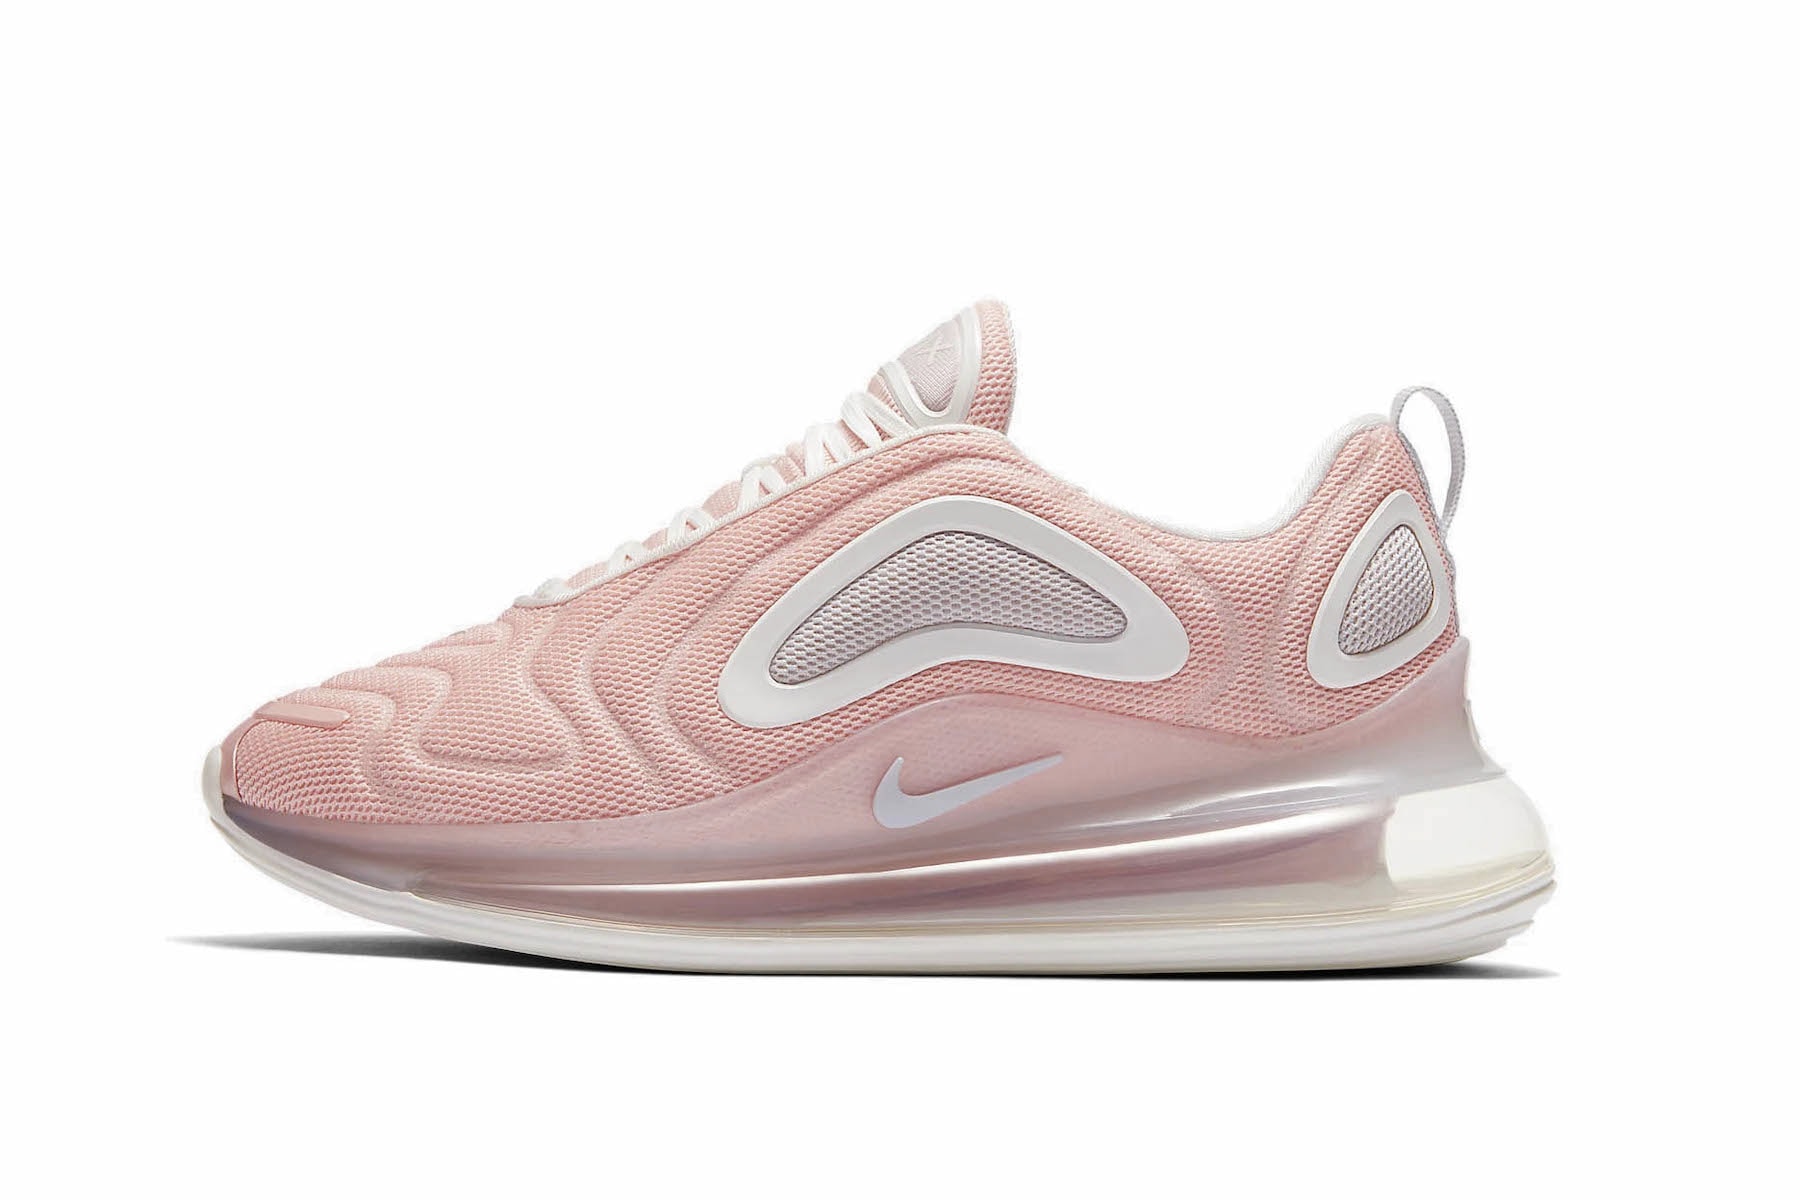 Nike Air Max 720 "Bleached Coral" Pastel Pink Sneaker Trainer Shoe Summer Footwear Release Chunky Platform Futuristic